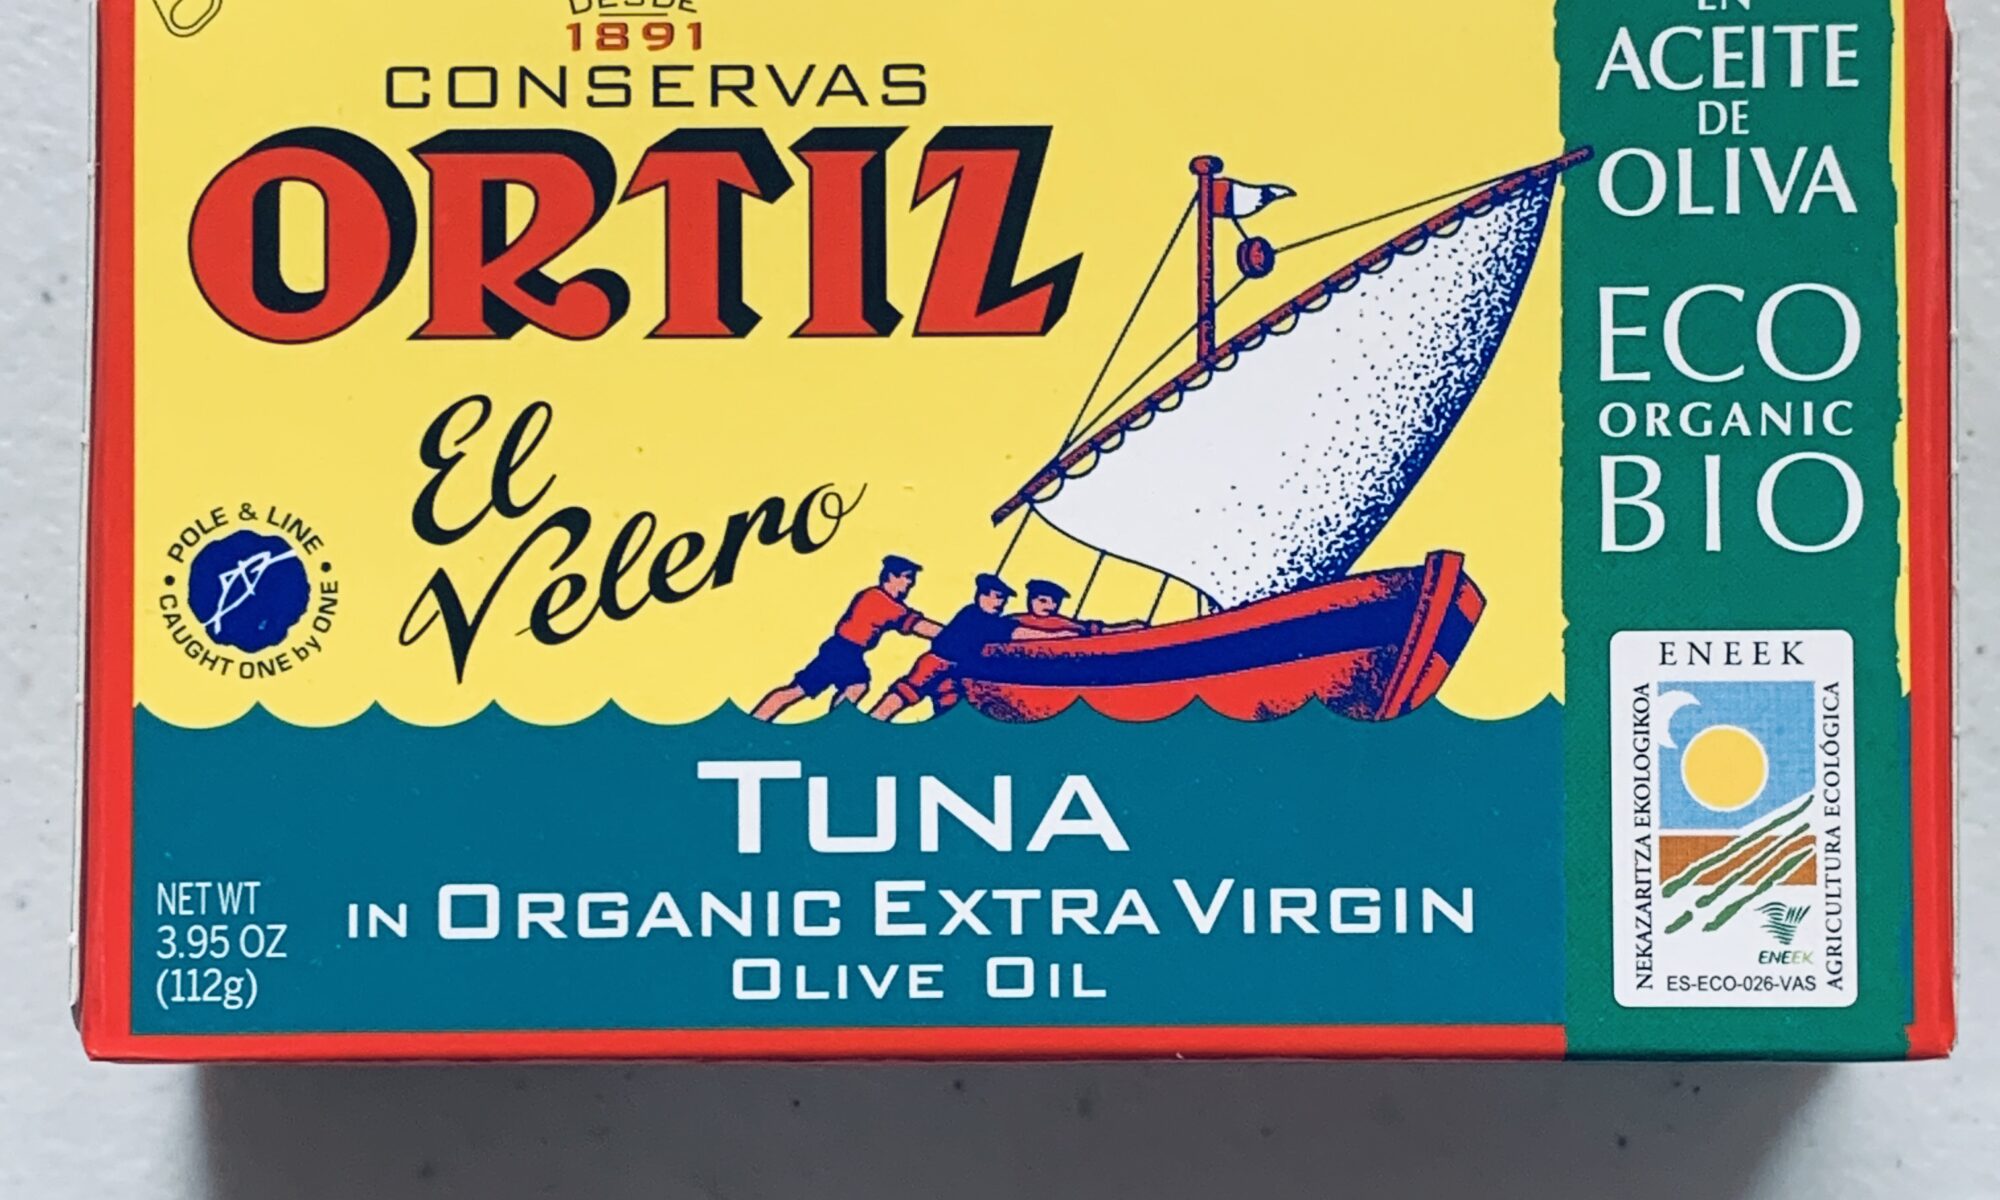 Image of the front of a package of Ortiz Yellowfin Tuna in Organic Extra Virgin Olive Oil